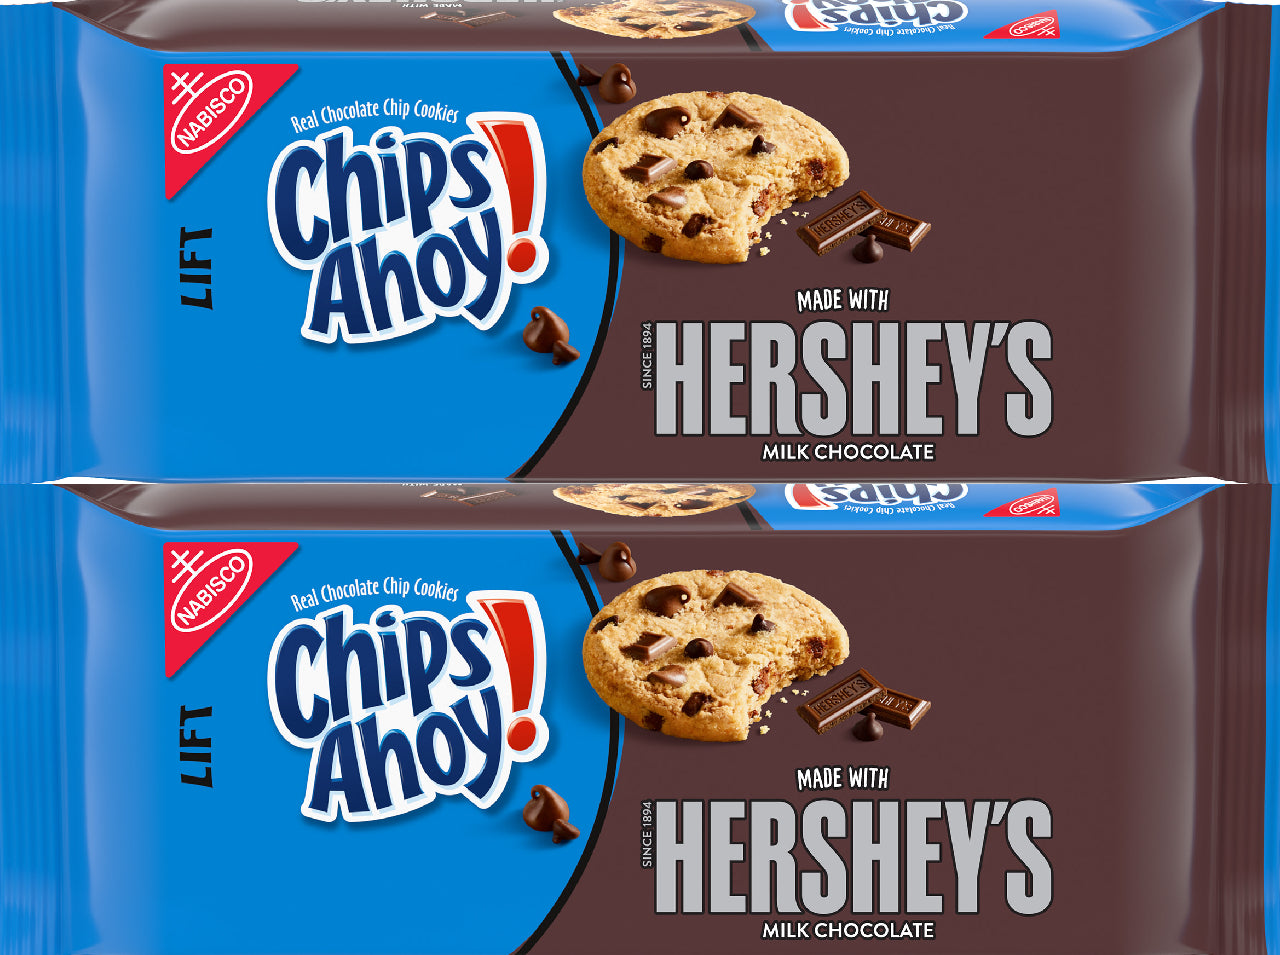 CHIPS AHOY! Cookies with Hershey's Milk Chocolate,  pack of 2